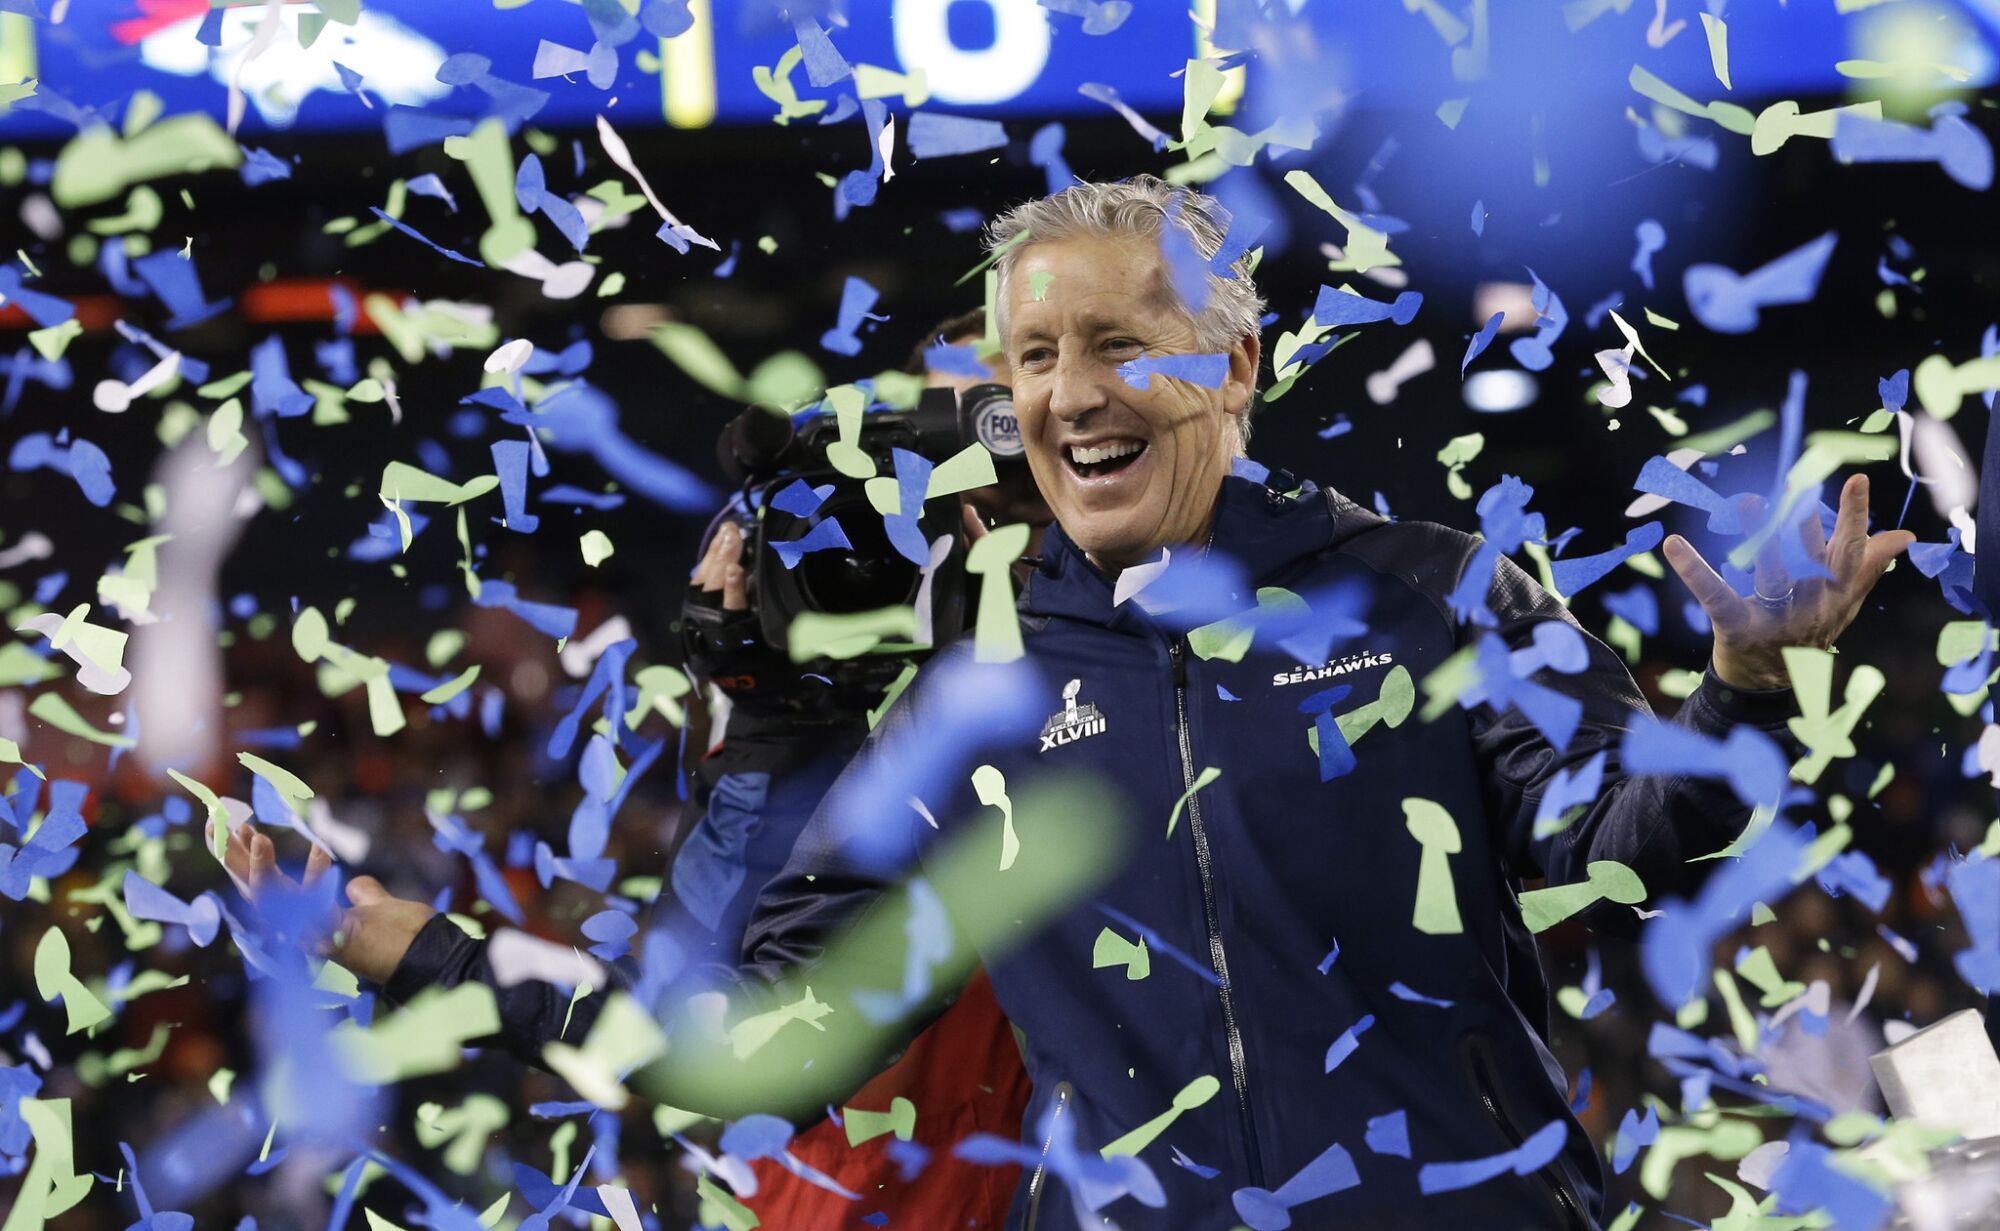 Pete Carroll celebrates after the Seahawks defeated the Denver Broncos 43-8 in Super Bowl XLVIII on Feb. 2, 20014.